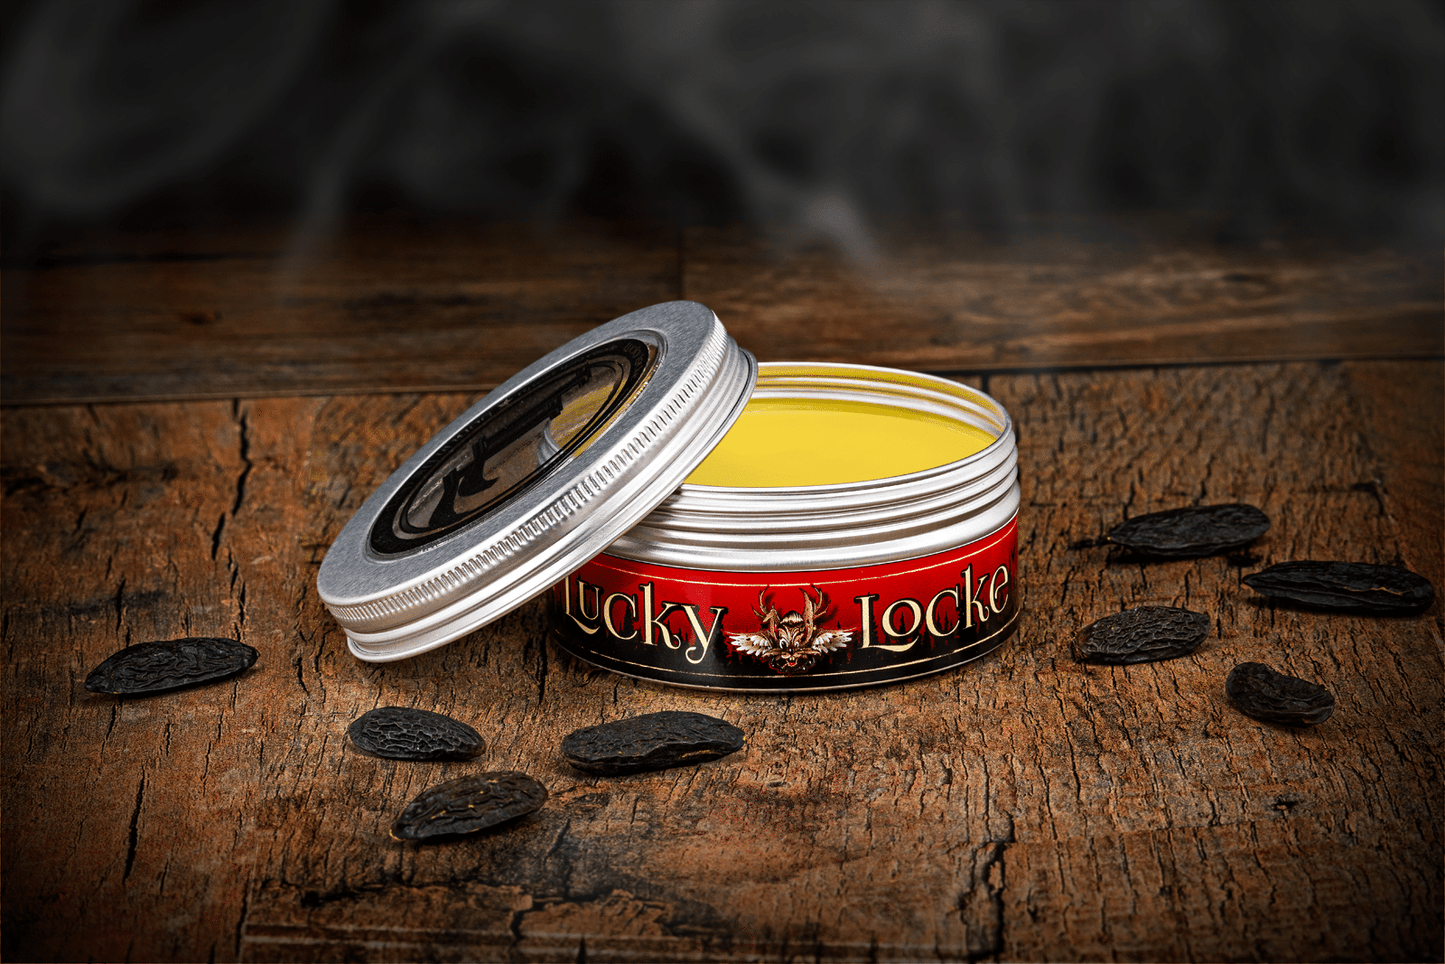 Lucky Locke Red “Crazy Bean” - Firm Hold Pomade